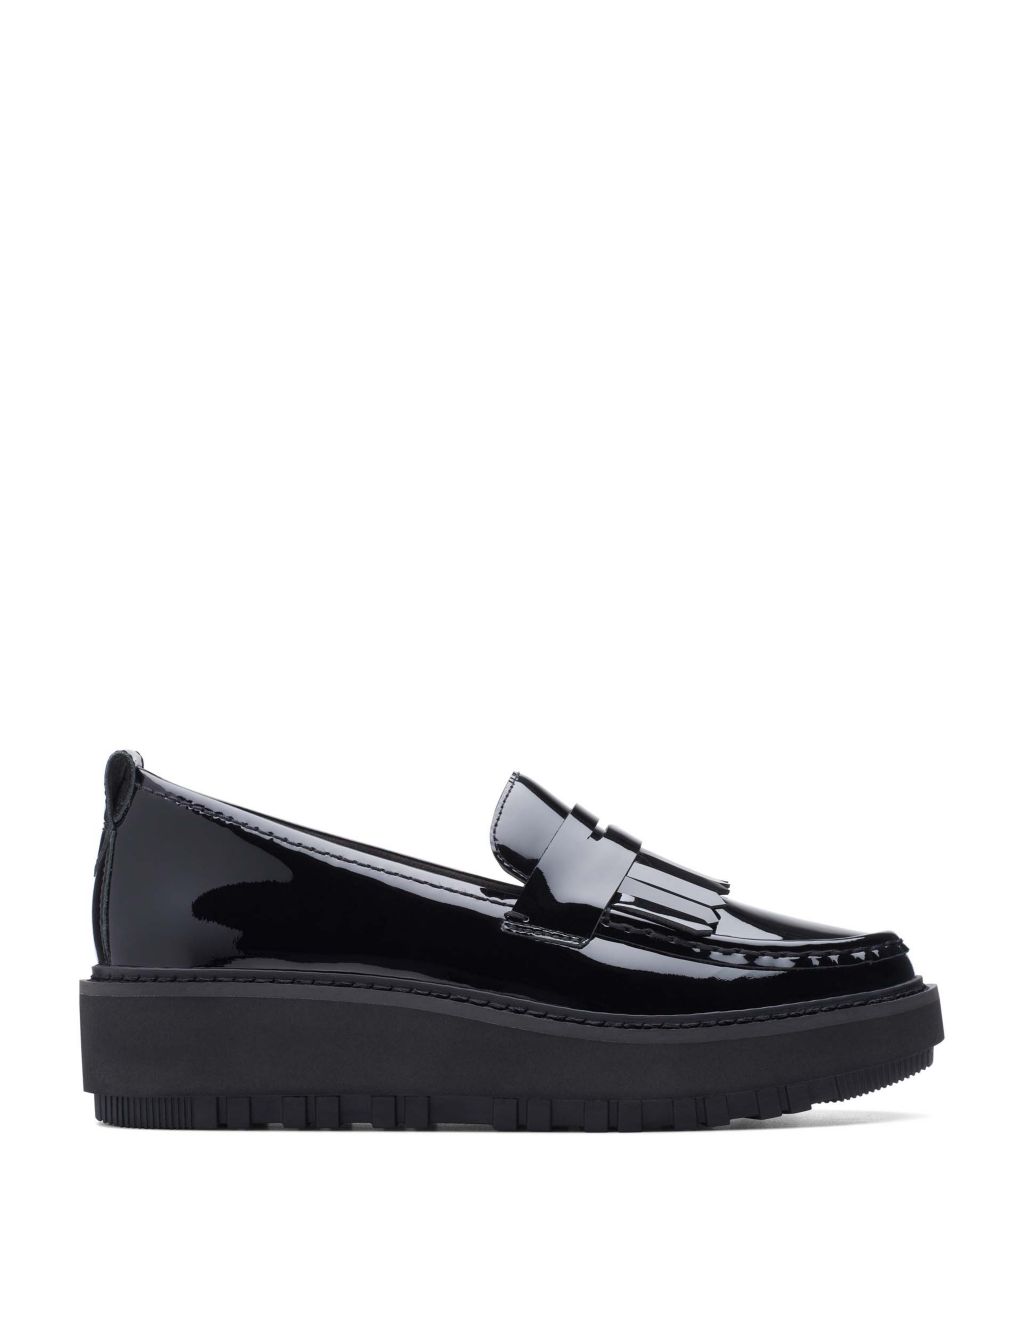 Leather Patent Flatform Loafers